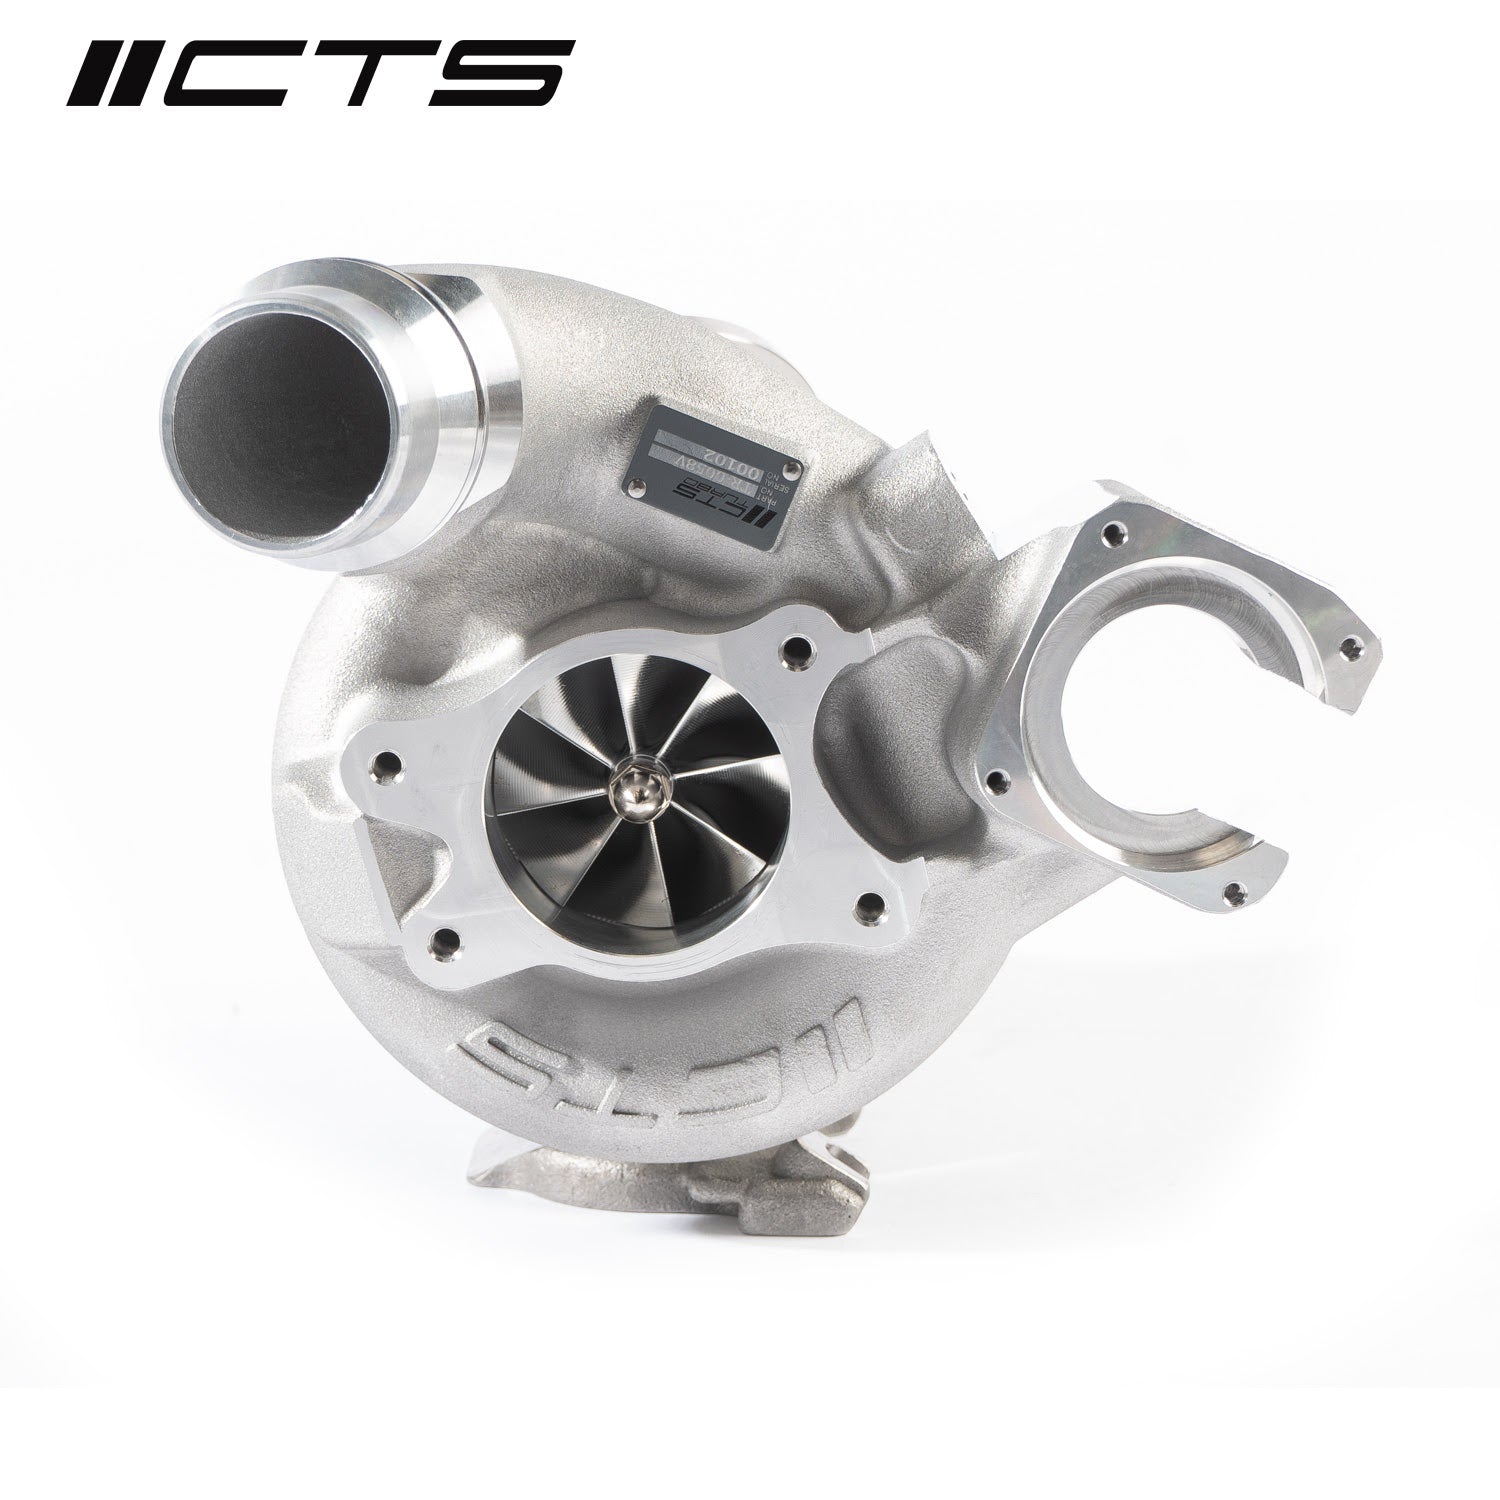 CTS TURBO STAGE 2+ TURBOCHARGER UPGRADE FOR F97/G80 BMW X3M/X4M/M2/M3/M4 WITH S58 ENGINE - 0